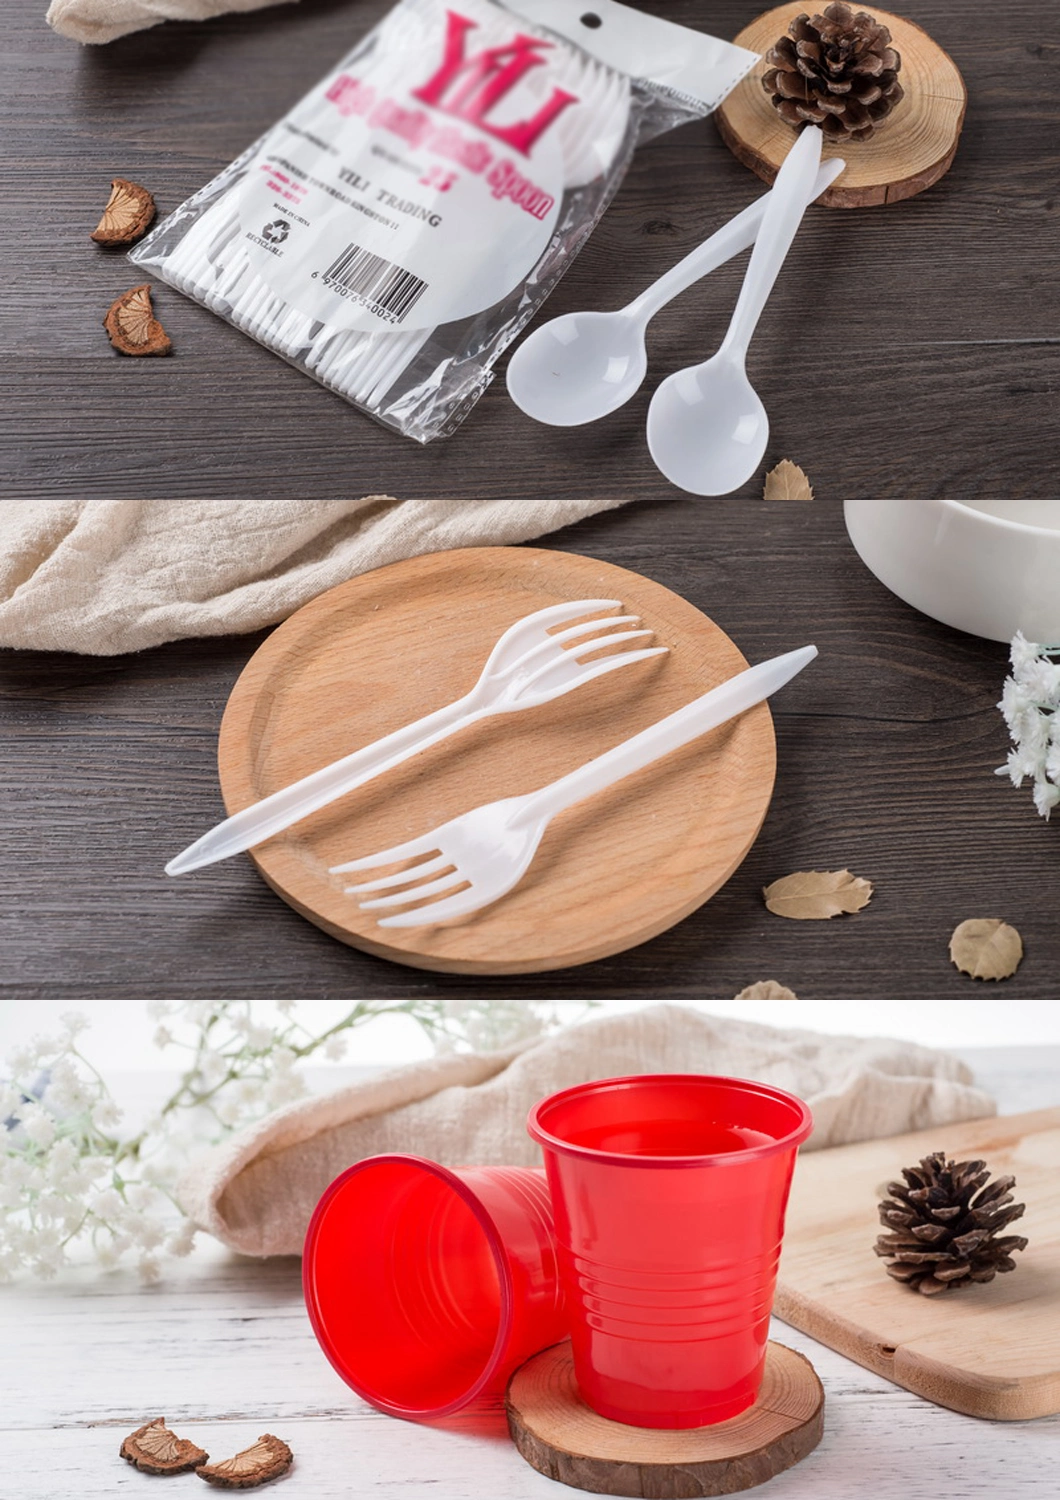 Hot Sale PP Material Plastic Disposable Cutlery Set Dinnerware Tableware Knife Fork Spoon and Cup